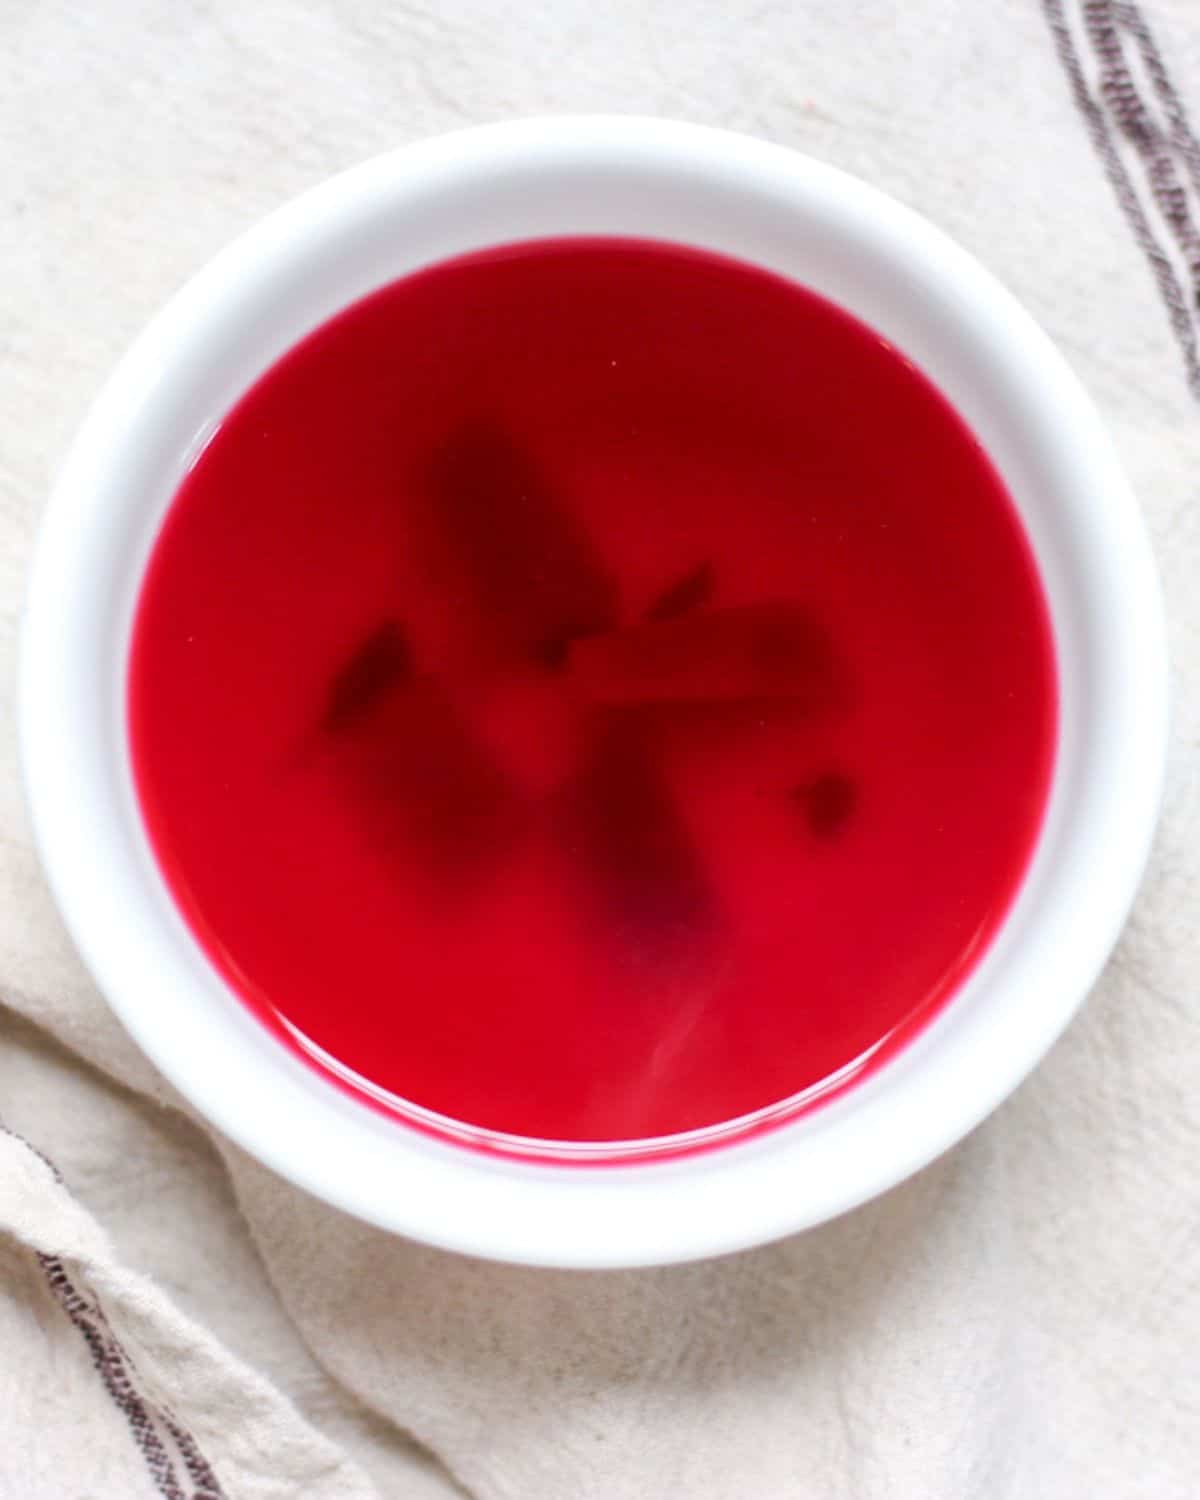 Clear Polish red borscht in a white bowl with a a few vegetable pieces visible at the bottom.